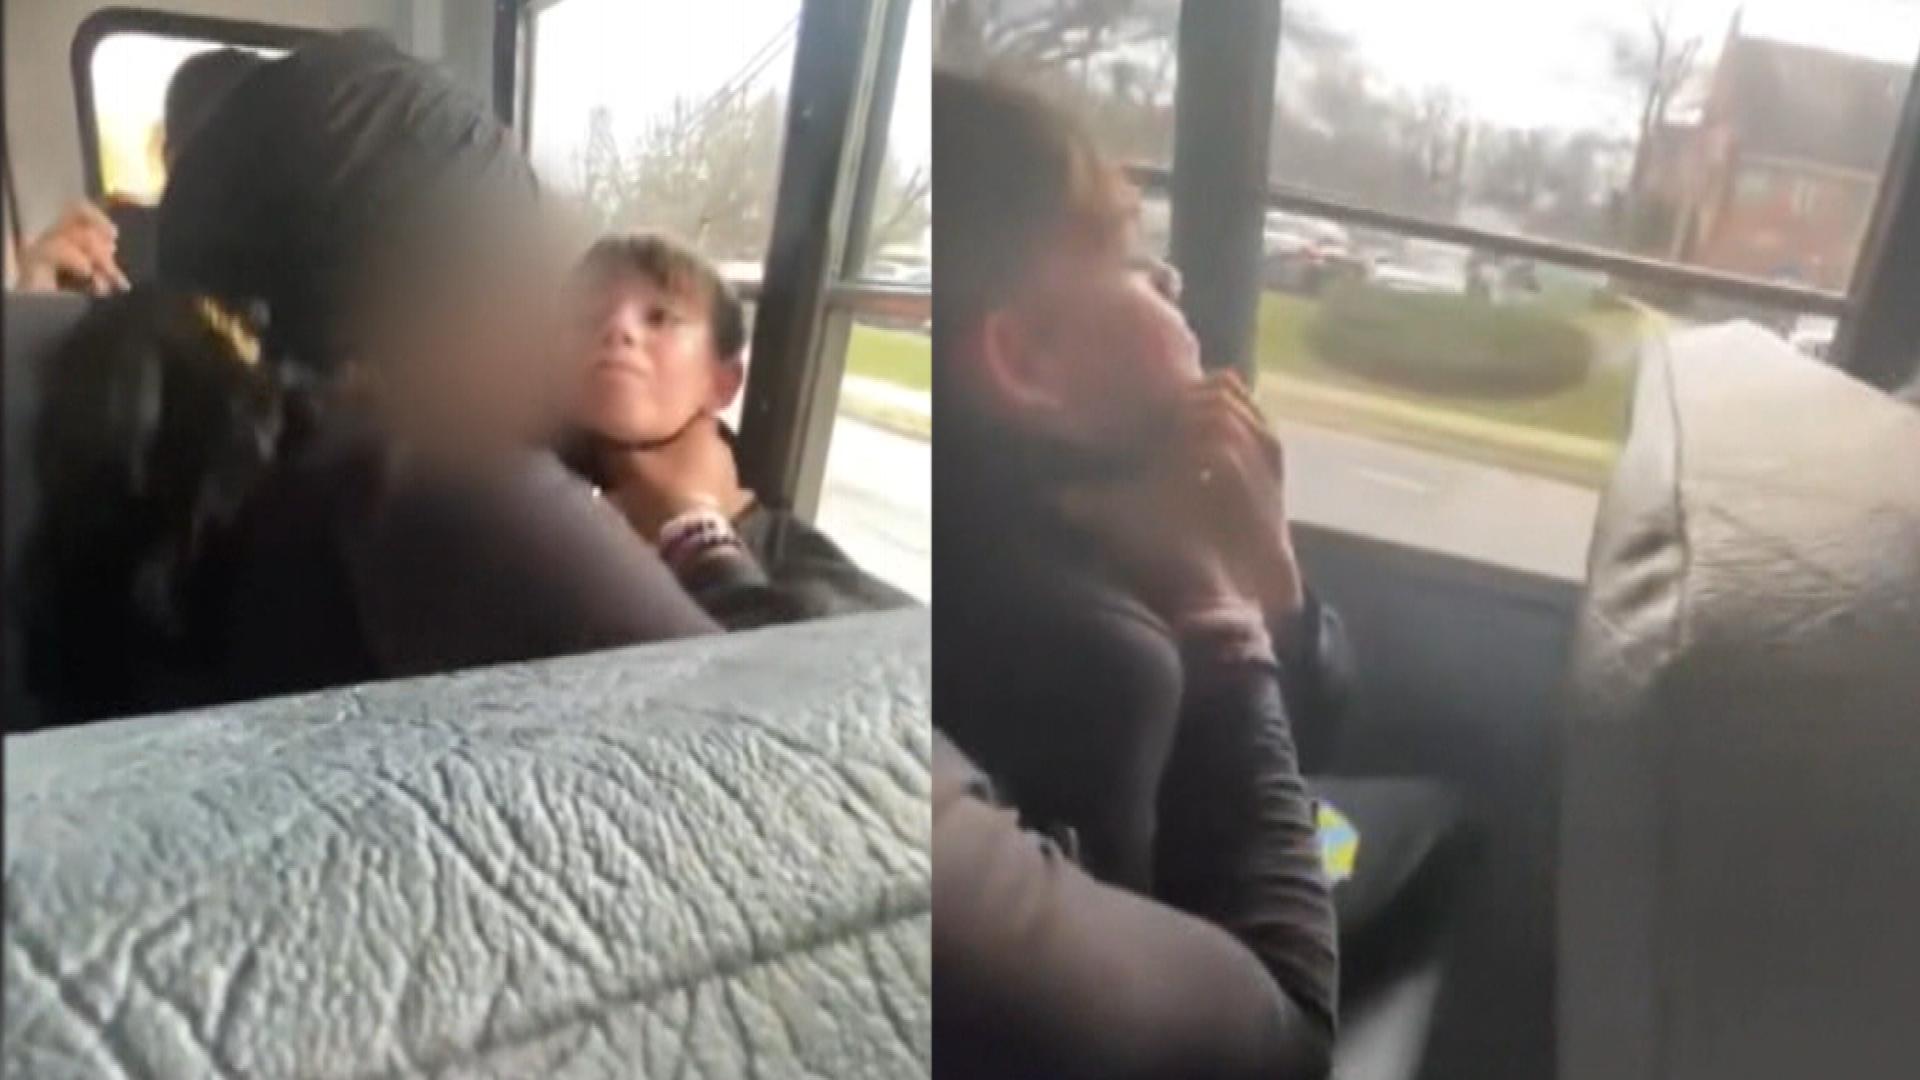 Bus Sleeping Xxx Sex - 12-Year-Old Boy Choked by Older Student on School Bus | Inside Edition